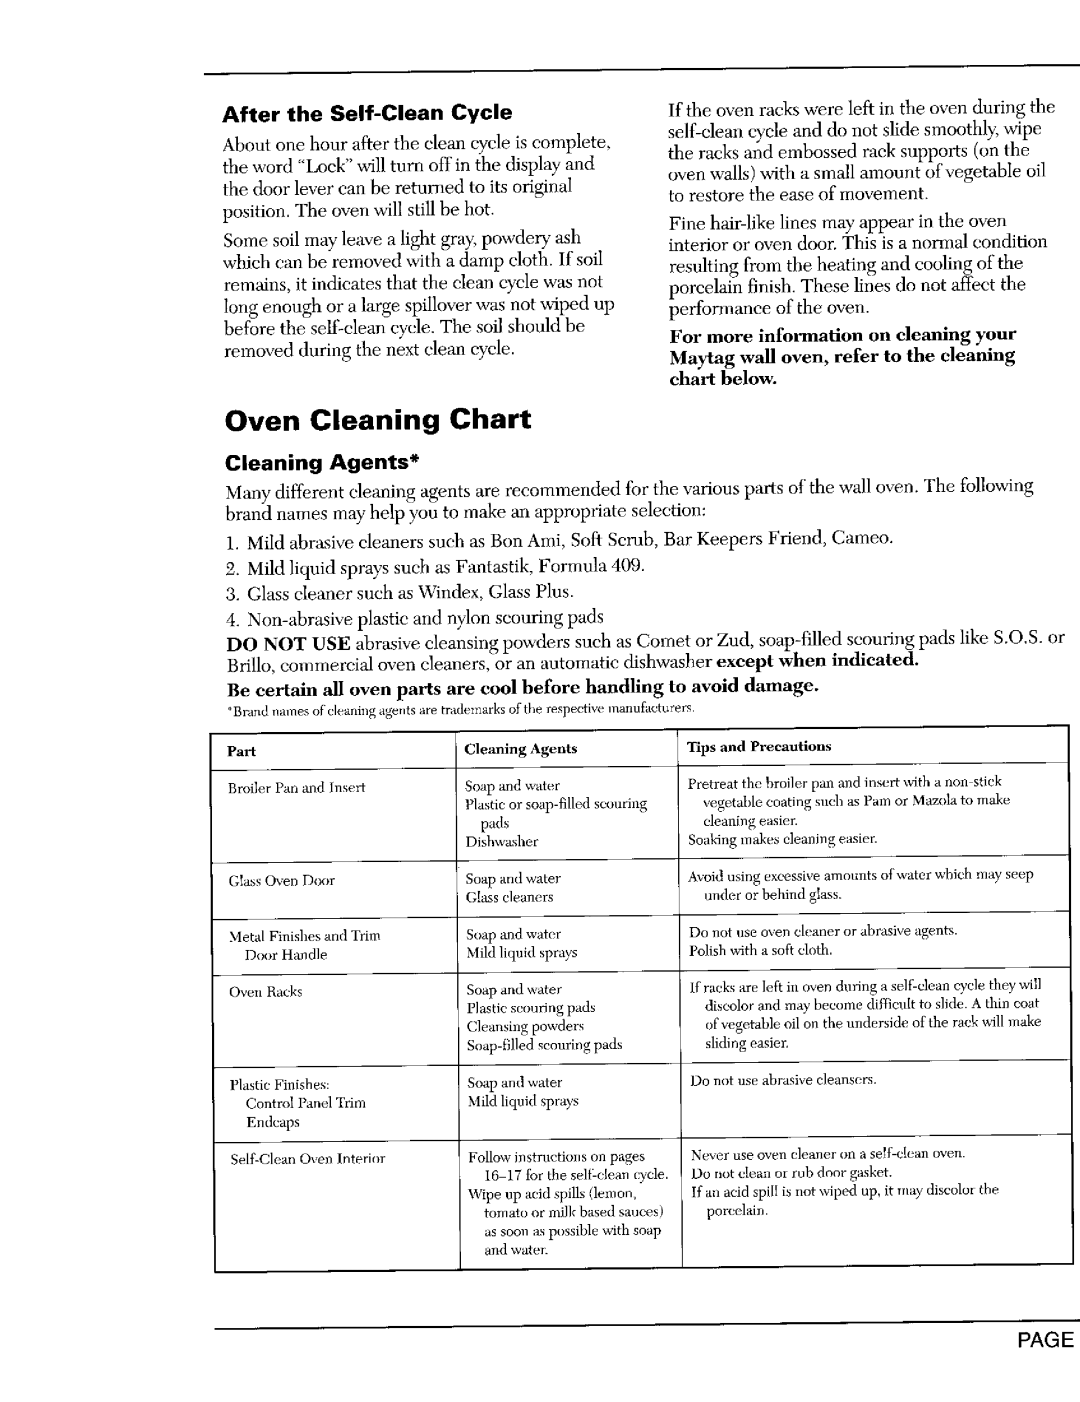 Maytag CWE9030D, CWE9030B Oven Cleaning Chart, After the Self-CleanCycle, For more information on cleaning your 